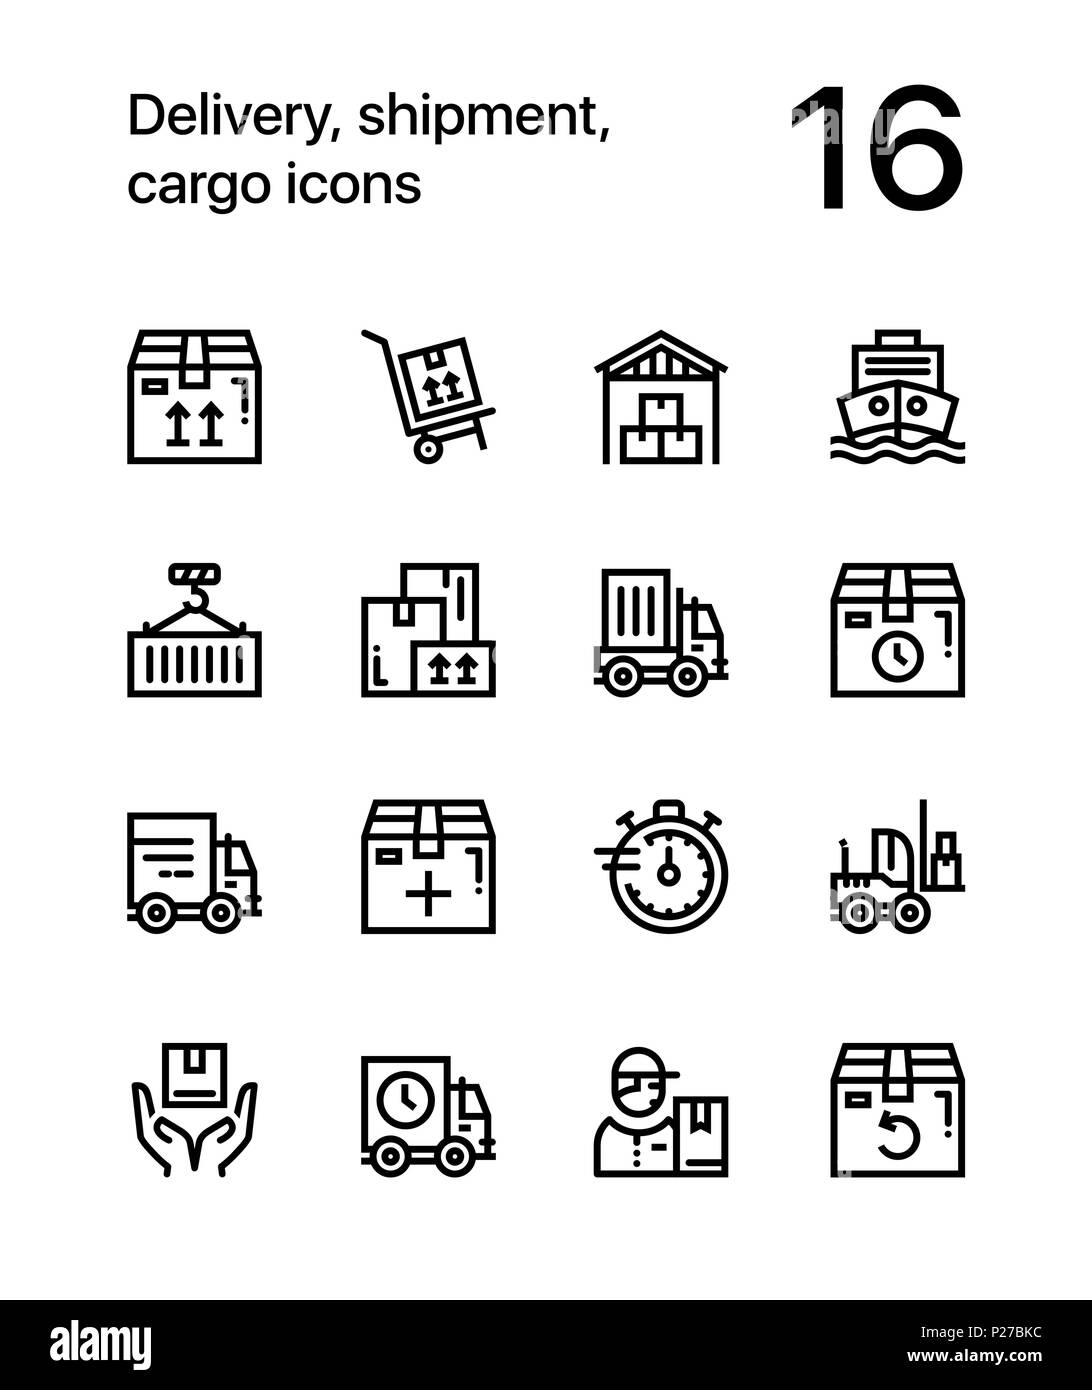 Delivery, shipment, cargo icons for web and mobile design pack 1 Stock Vector